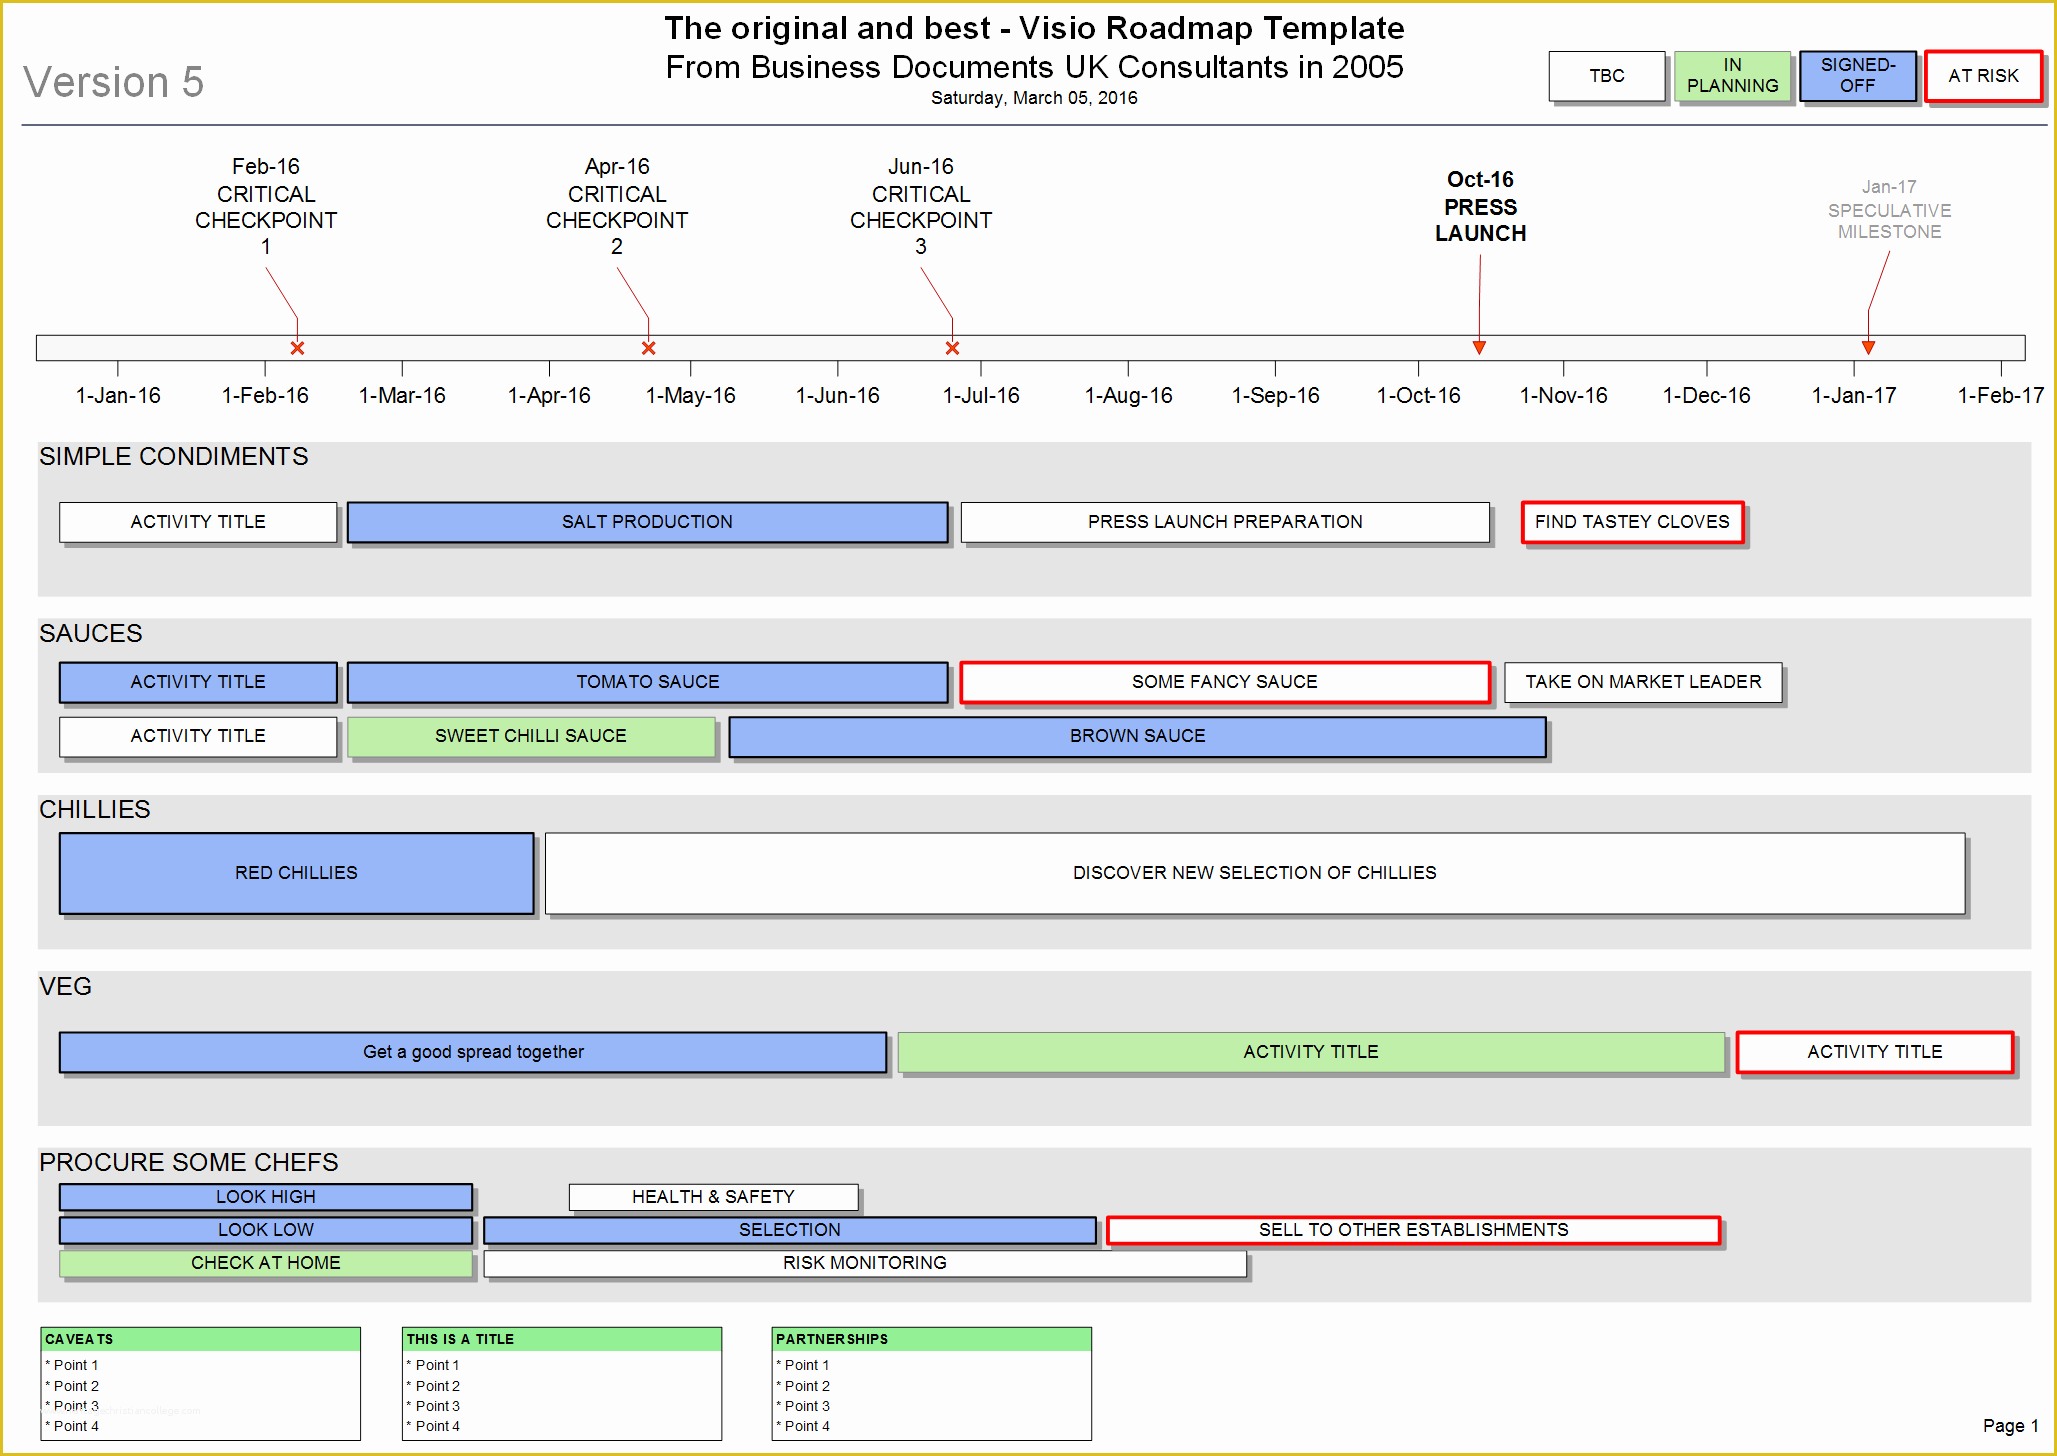 Project Management Roadmap Template Free Of Visio Roadmap Template the original & Best since 2005